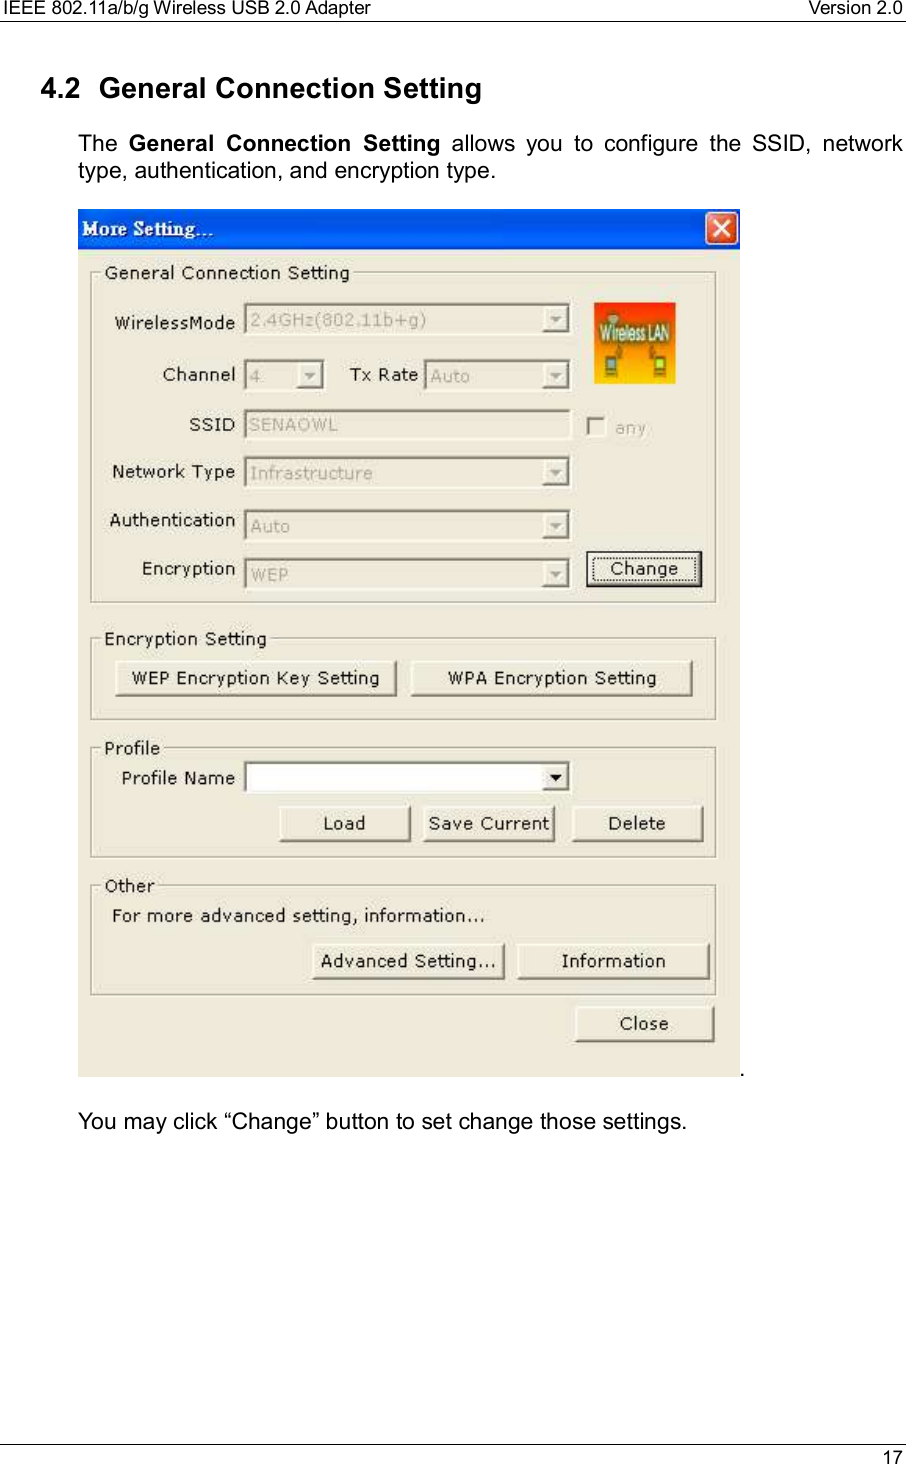 IEEE 802.11a/b/g Wireless USB 2.0 Adapter Version 2.0 174.2 General Connection SettingThe  General Connection Setting allows you to configure the SSID, networktype, authentication, and encryption type..You may click “Change” button to set change those settings.